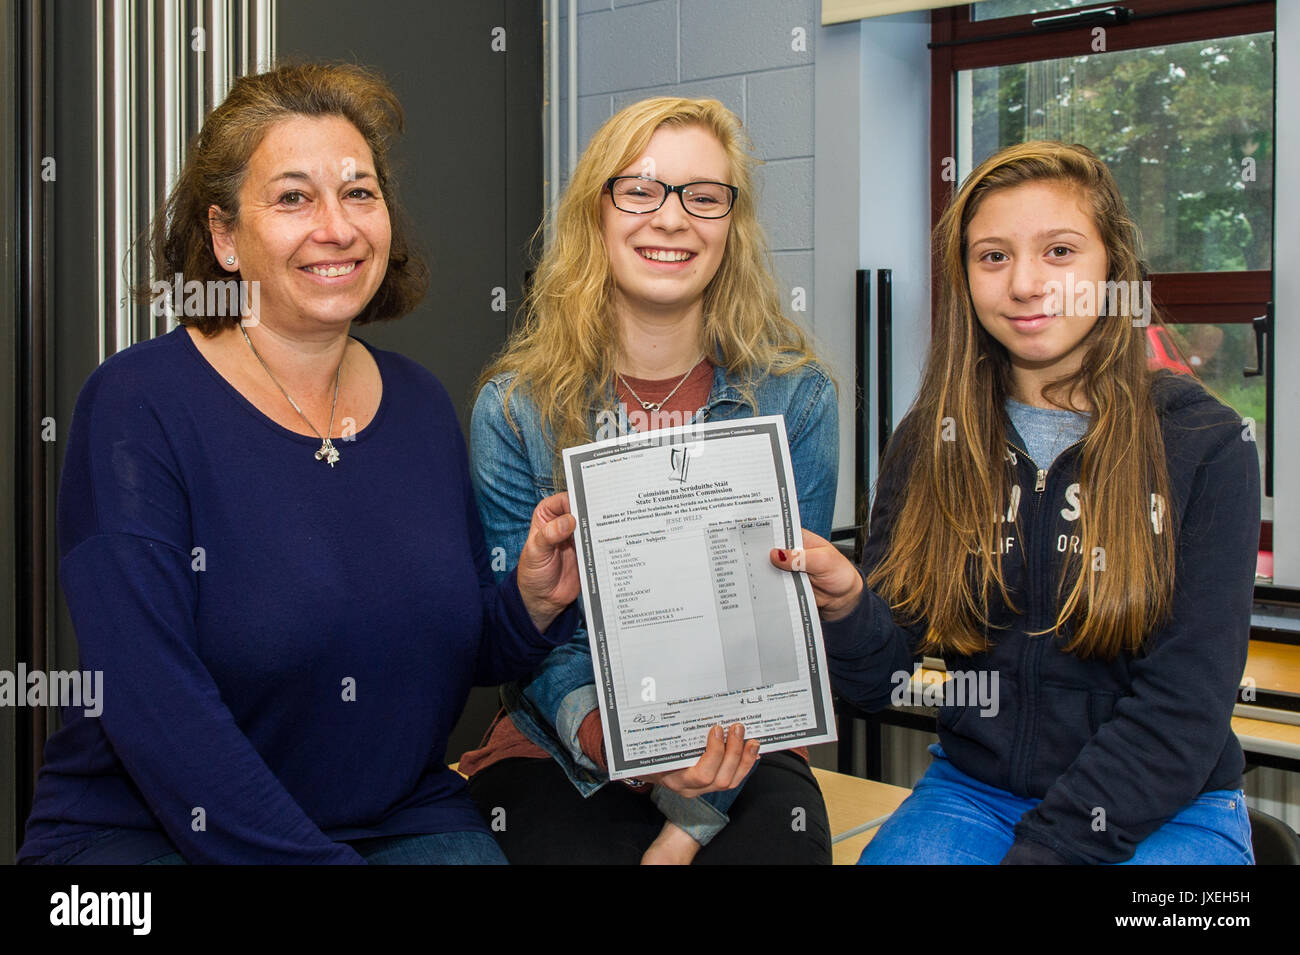 Schull, Ireland. 16th Aug, 2017. Leaving Cert student Jesse Wells from Schull is pictured with her mum Helen and sister Molly after receiving her Leaving Cert results at Schull Community College.  Jesse is going to London UAL to study Interaction Design Arts. Credit: Andy Gibson/Alamy Live News. Stock Photo